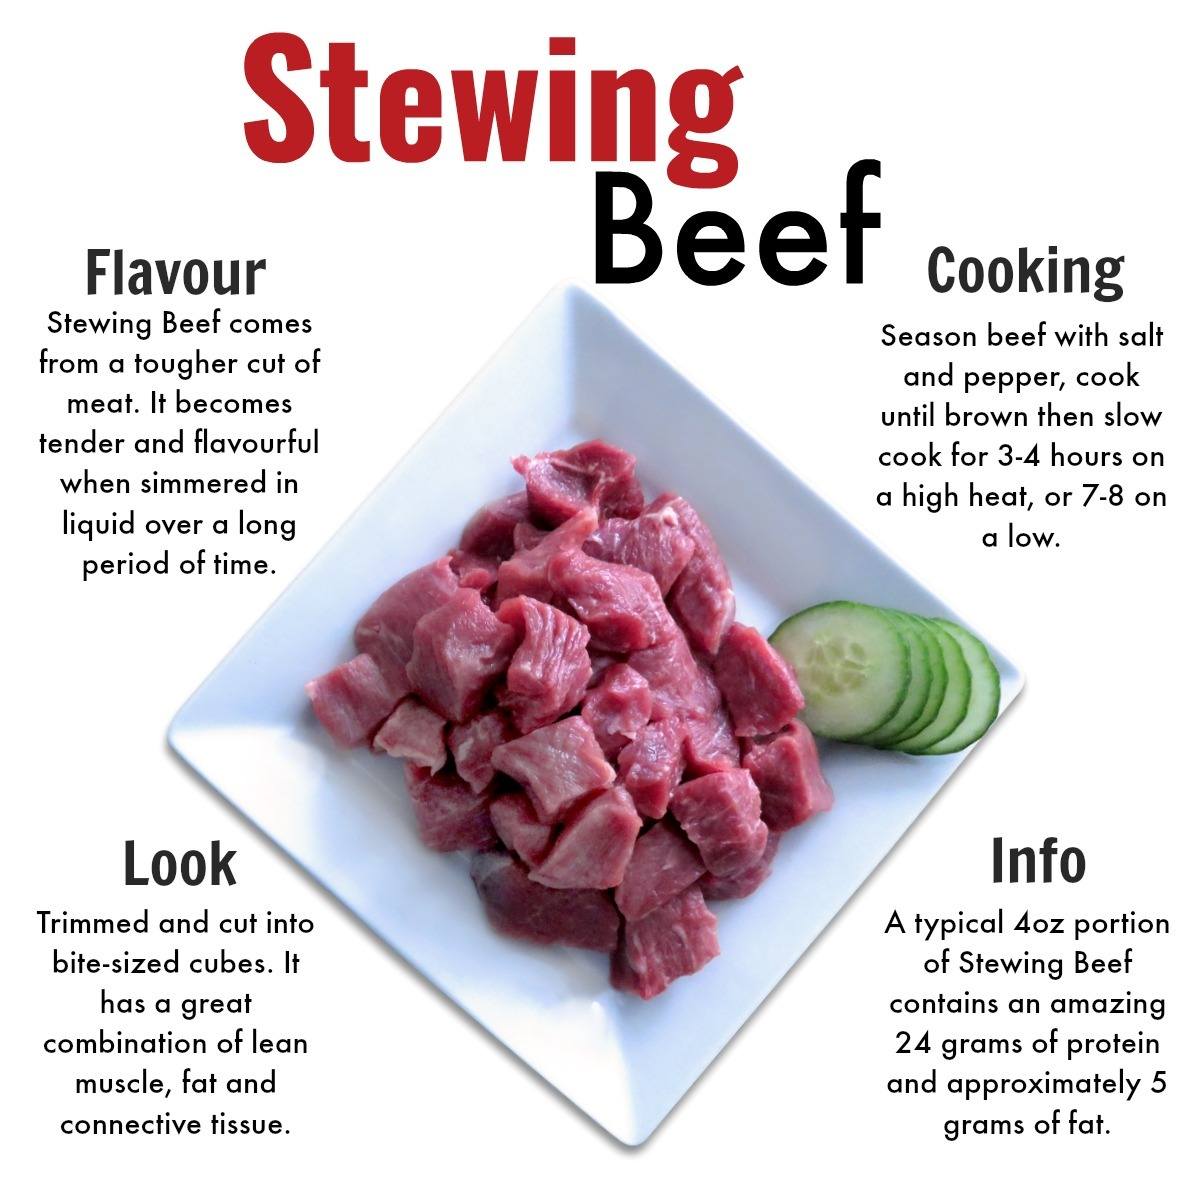 Affordable grass-fed beef delivery near me, steaks, ground beef and more - Stewing Beef 2